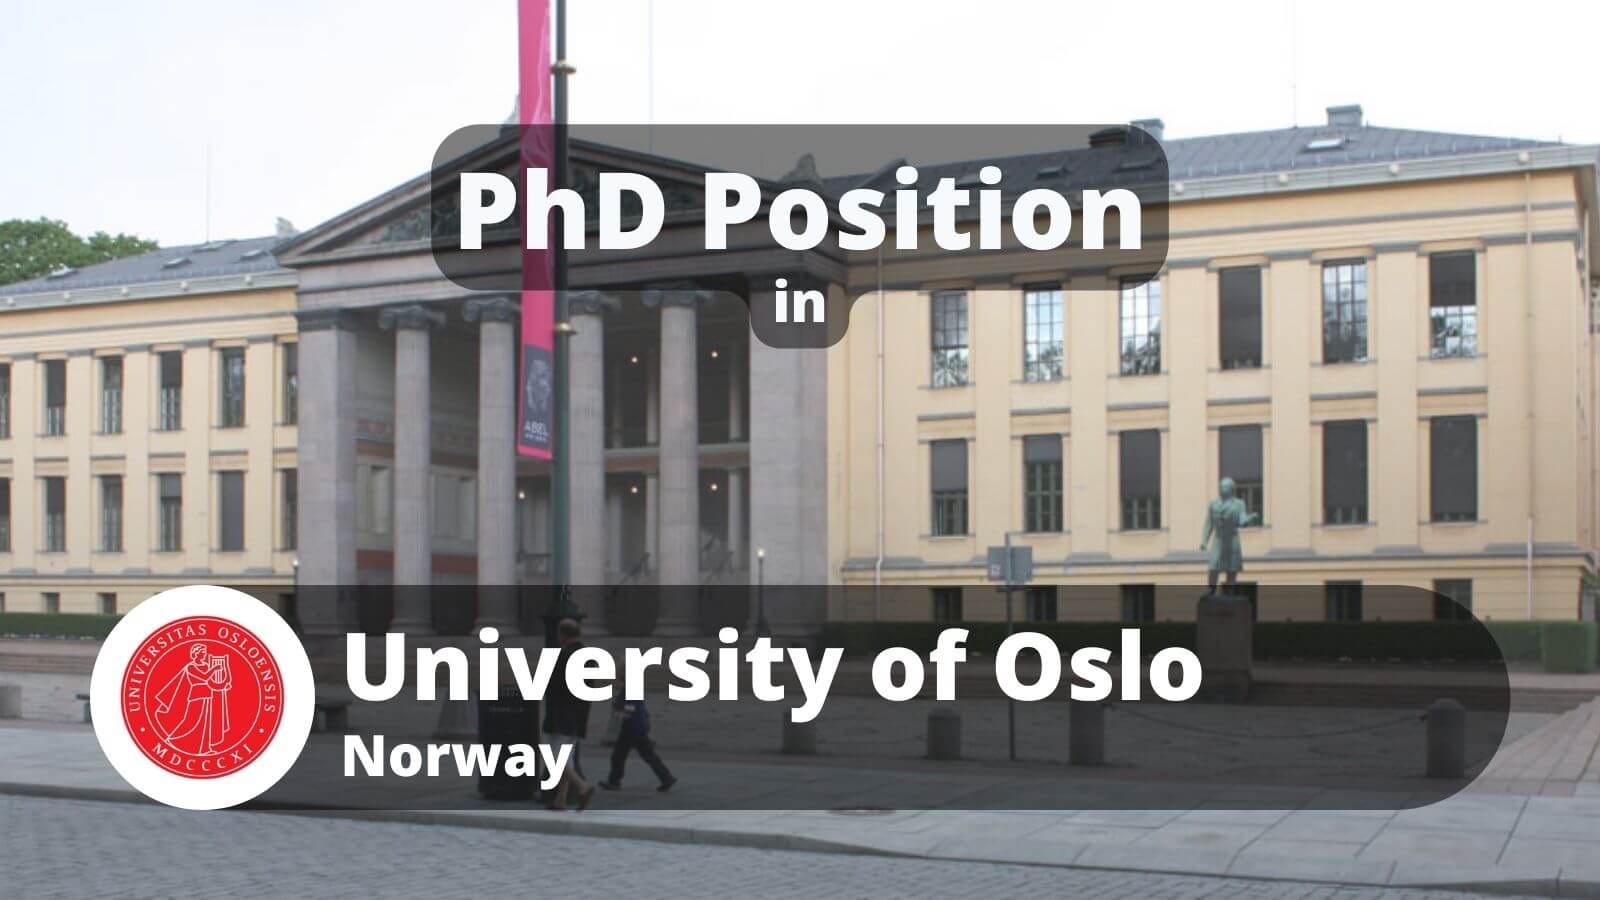 PhD Position in University of Oslo Norway